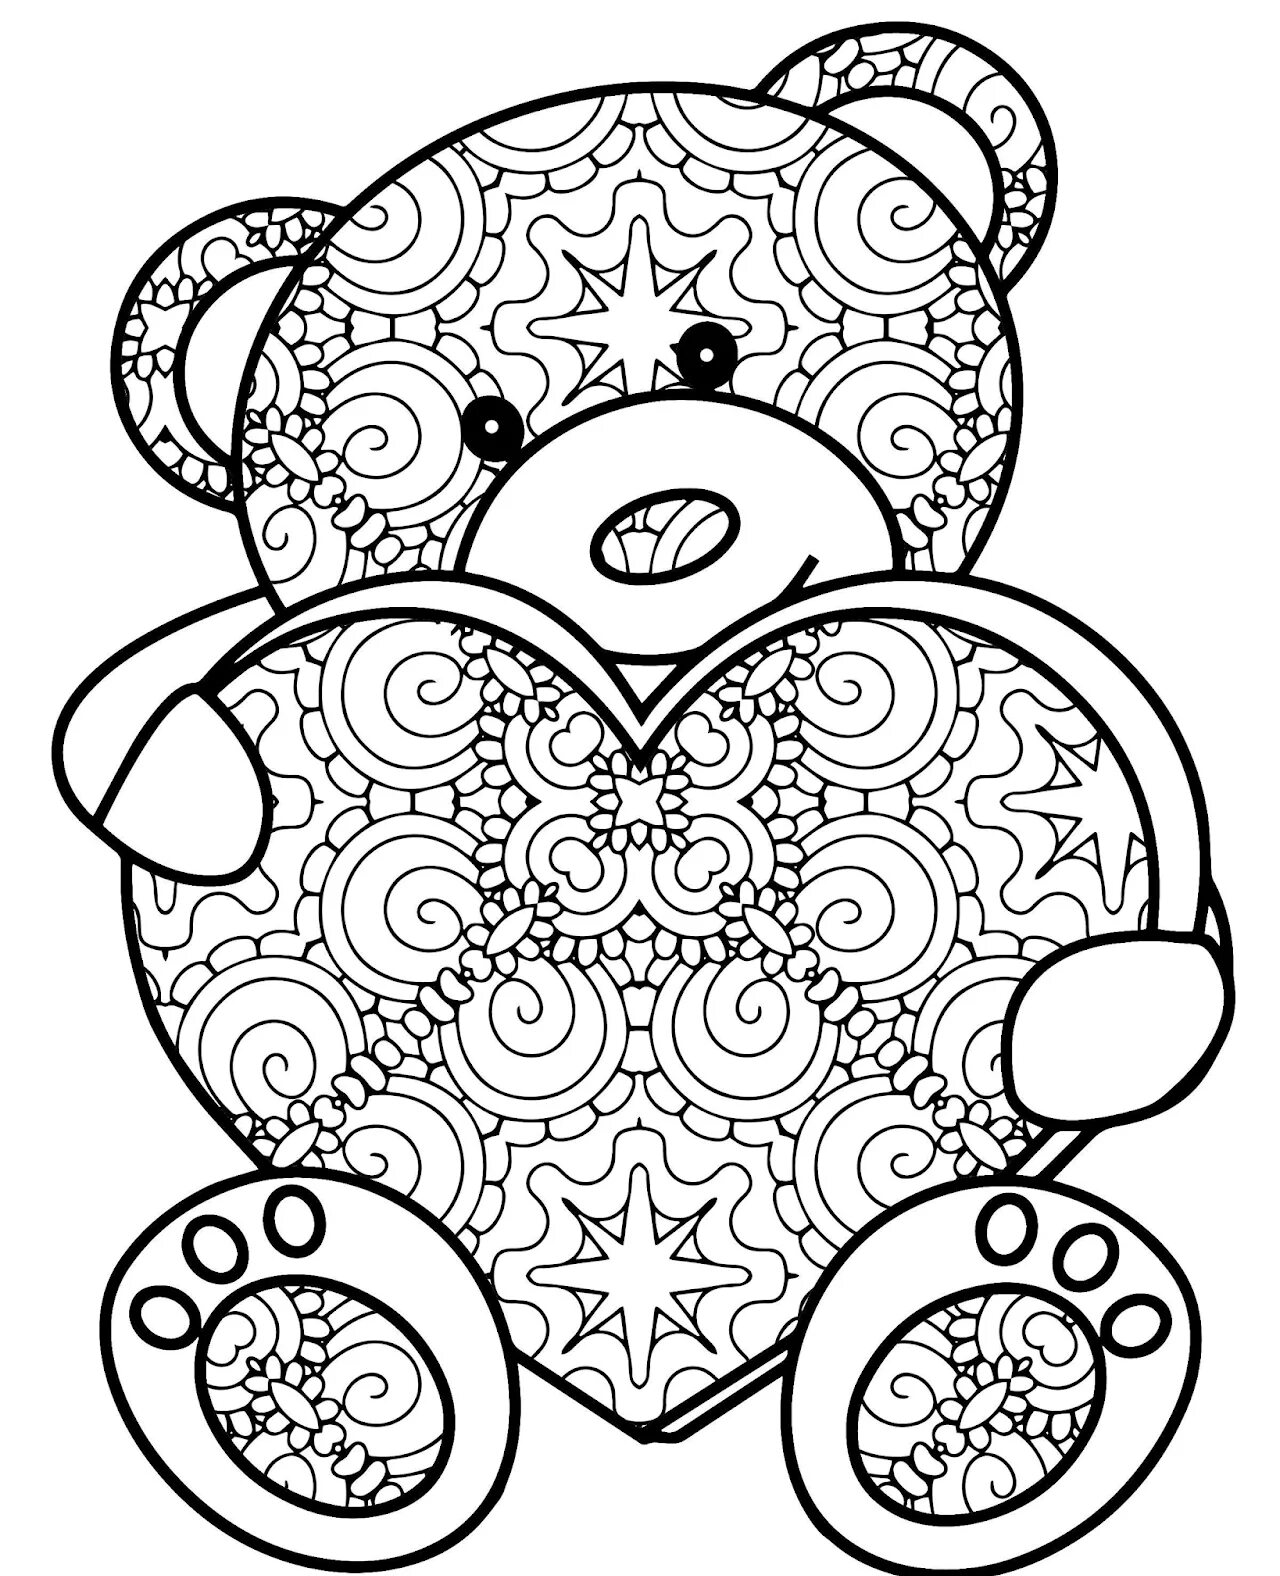 Coloring book satisfying anti-stress lungs